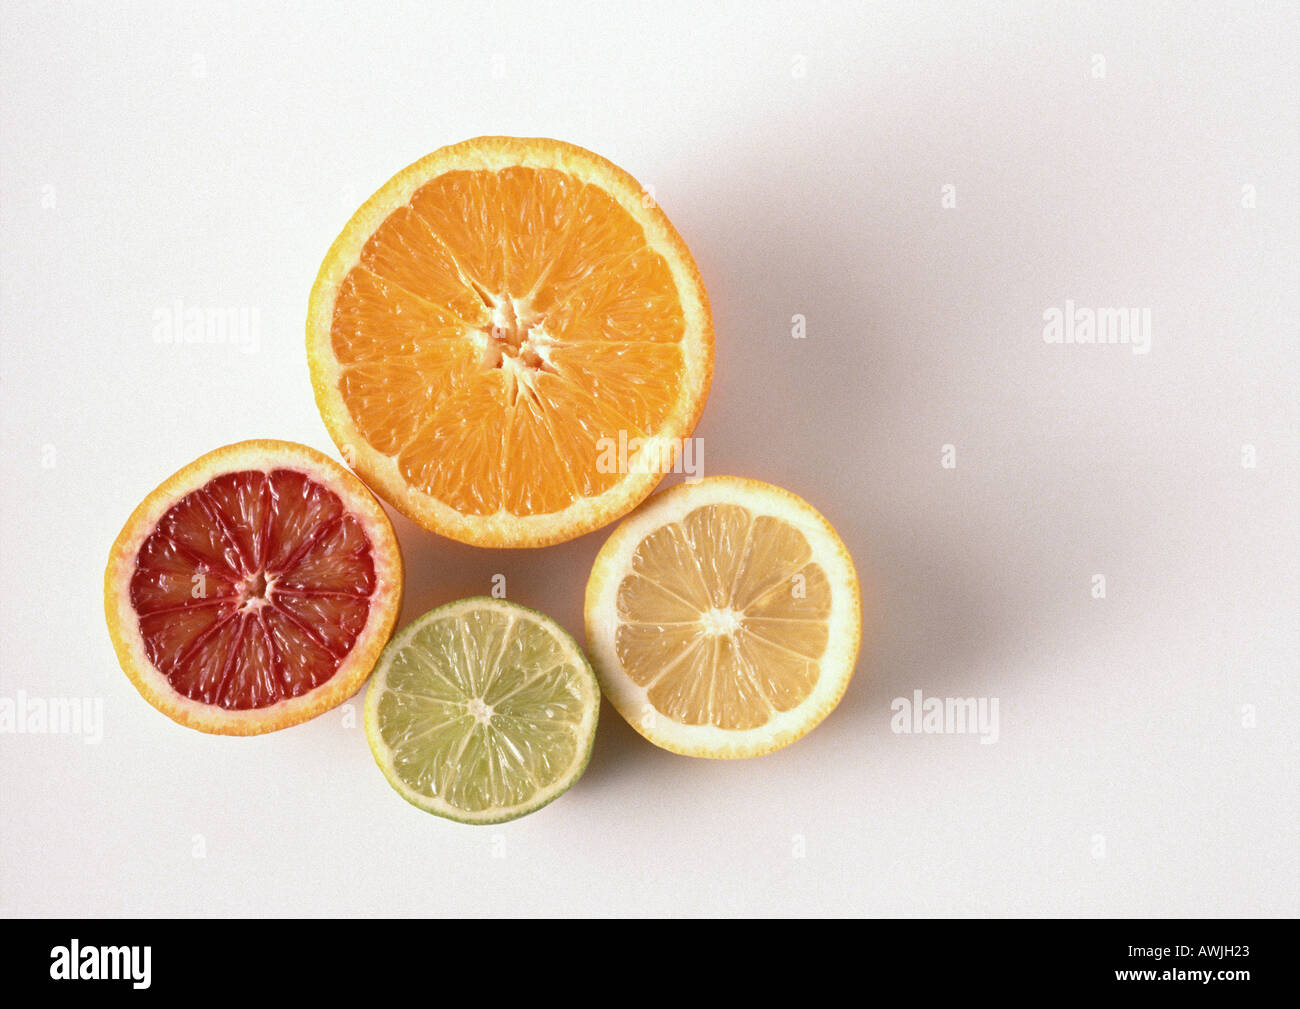 Cross sections of orange, blood orange, lemon, lime, close-up, high angle view, white background Stock Photo